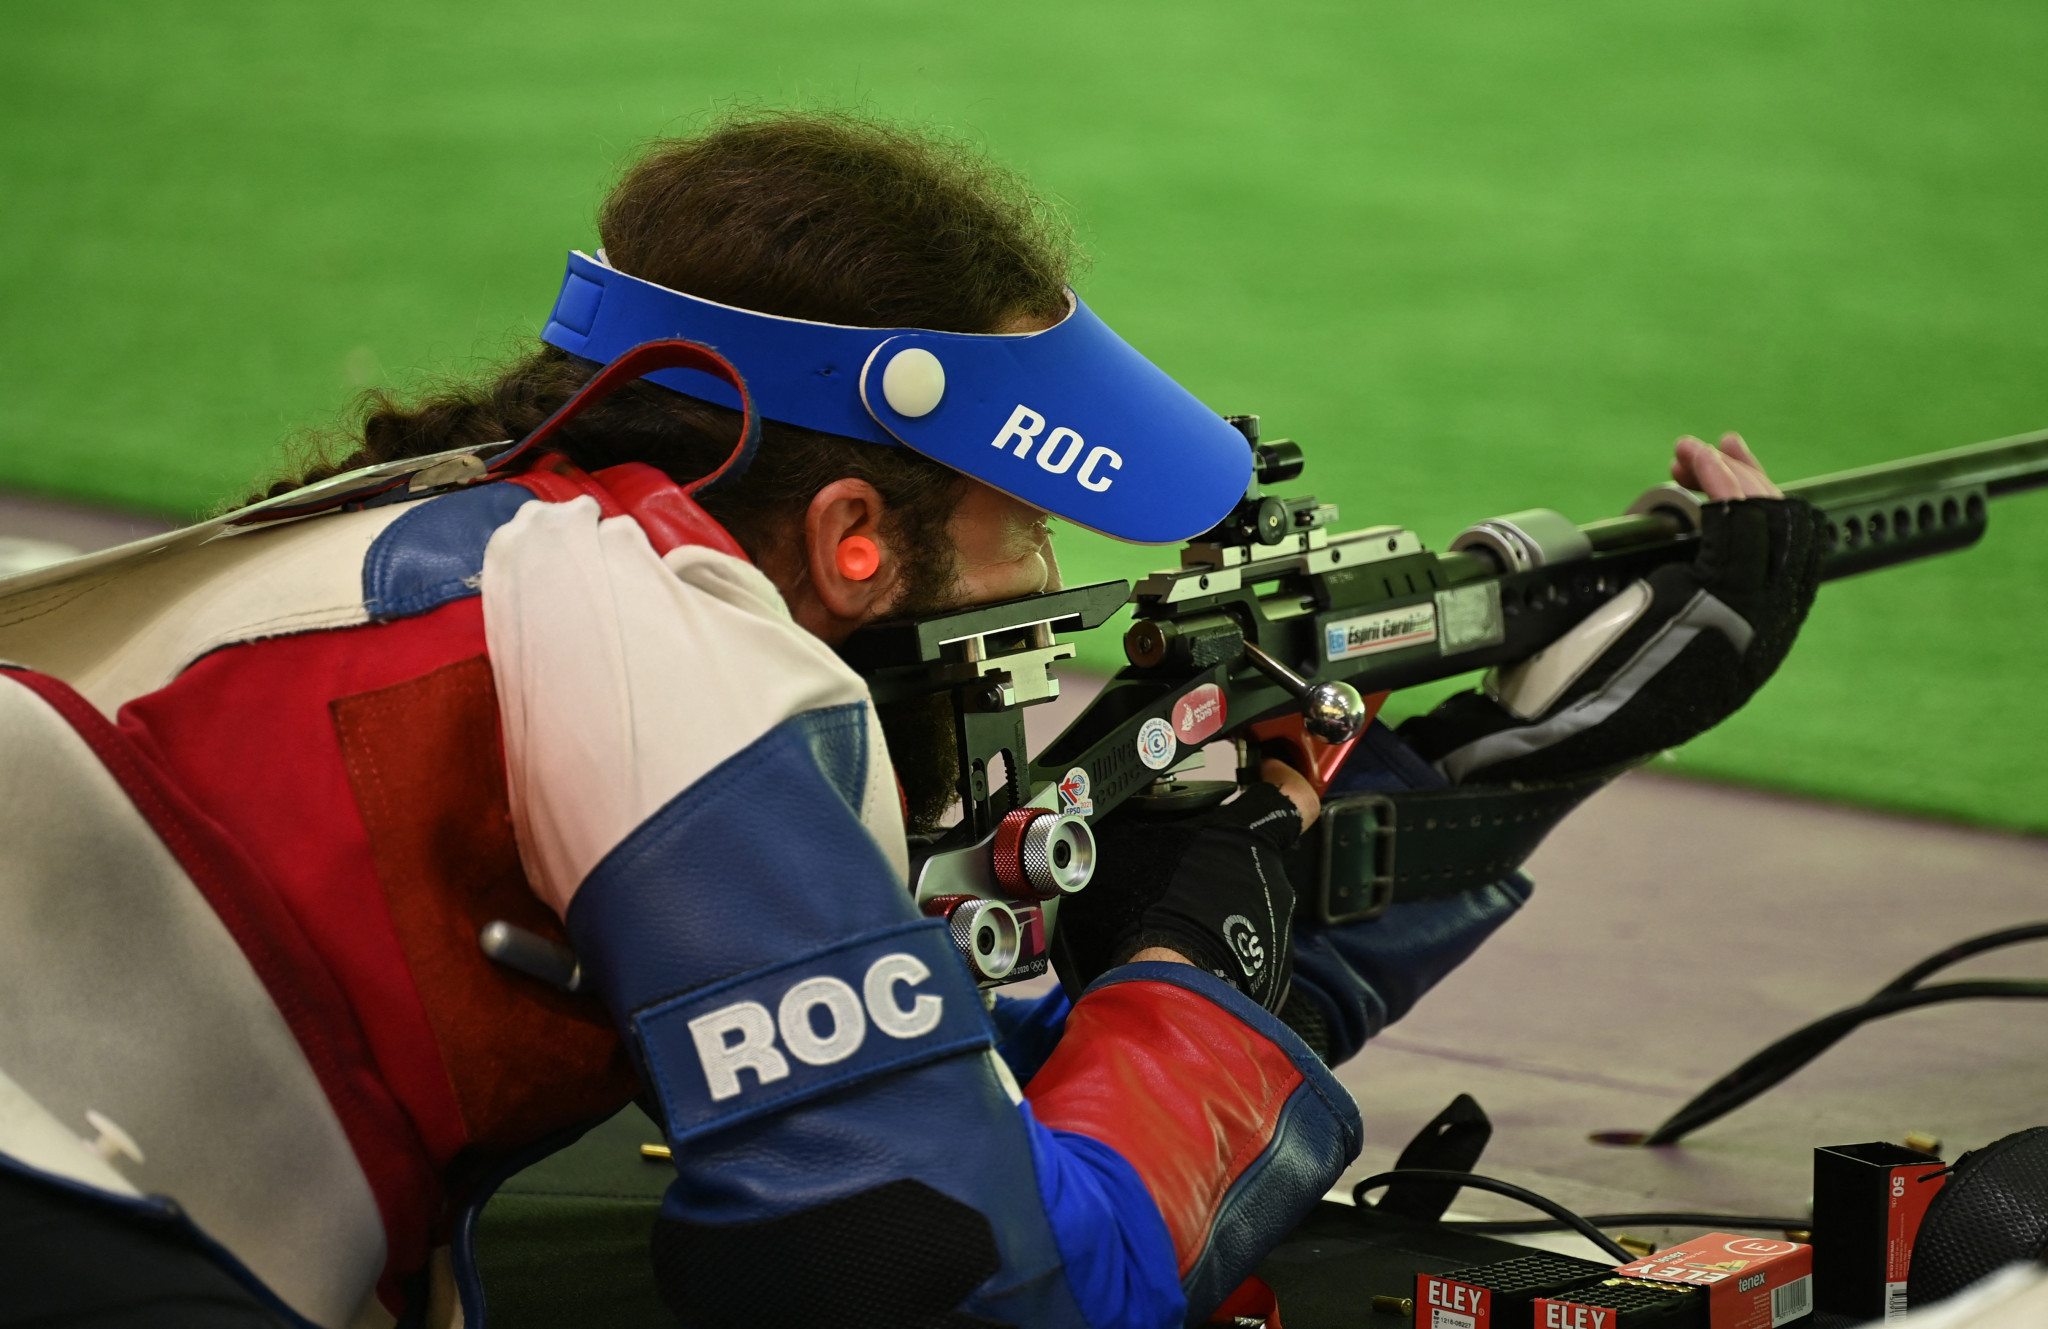 ISSF agrees to readmit Russian and Belarusian shooters as neutrals